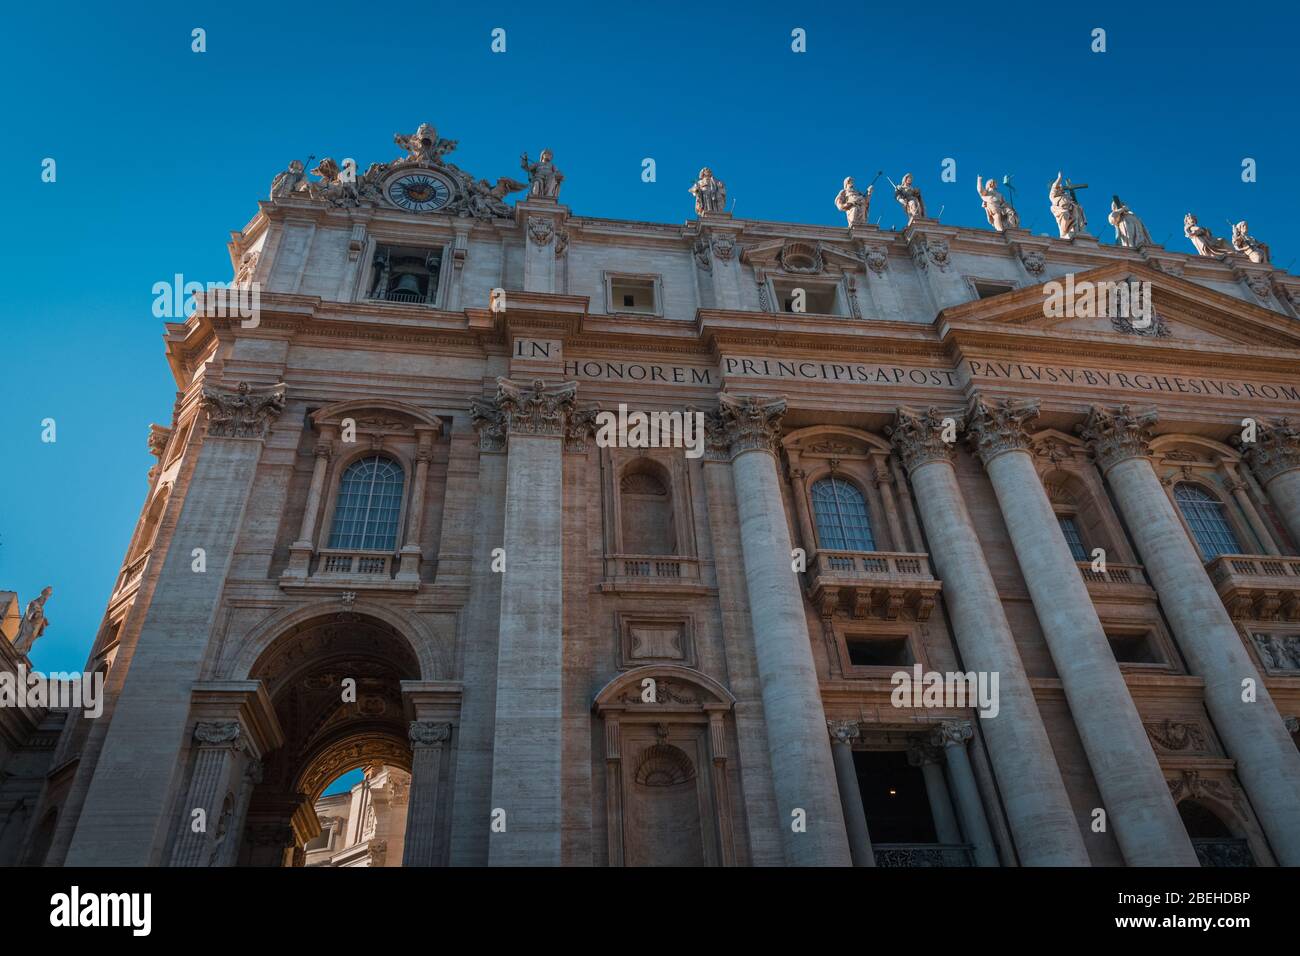 Vatican City before COVID-19 pandemic Stock Photo